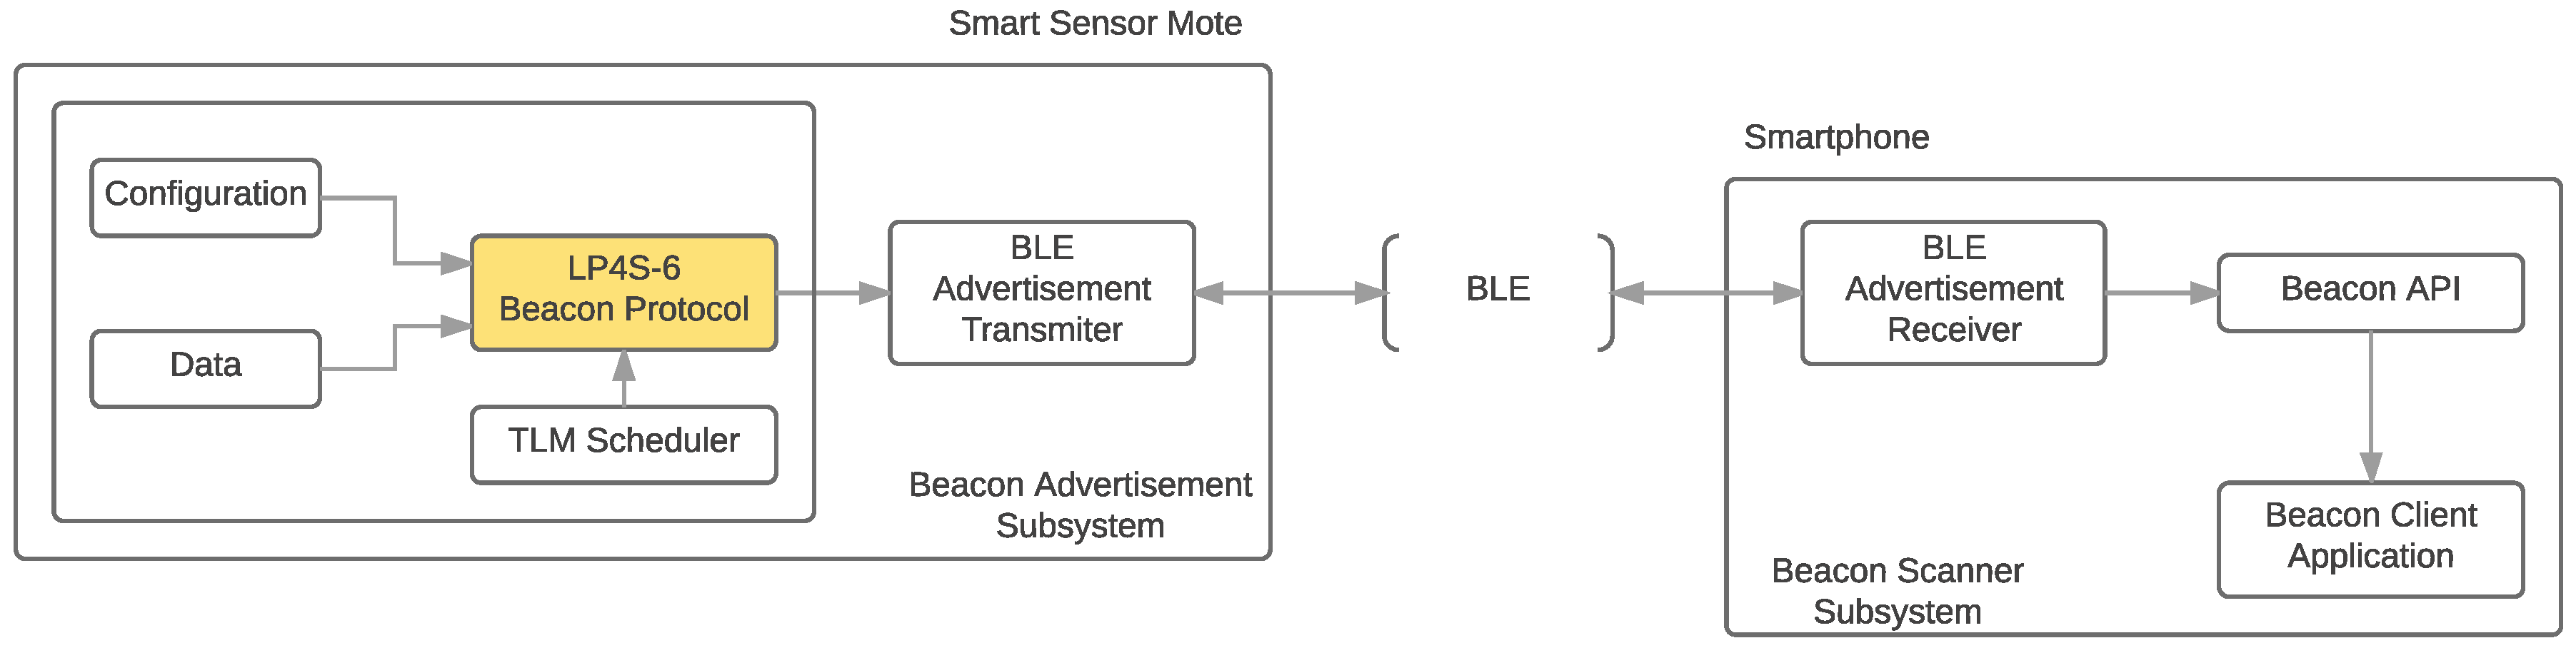 Sensors | Free Full-Text | Design and Practical Evaluation of a Family of  Lightweight Protocols for Heterogeneous Sensing through BLE Beacons in IoT  Telemetry Applications | HTML